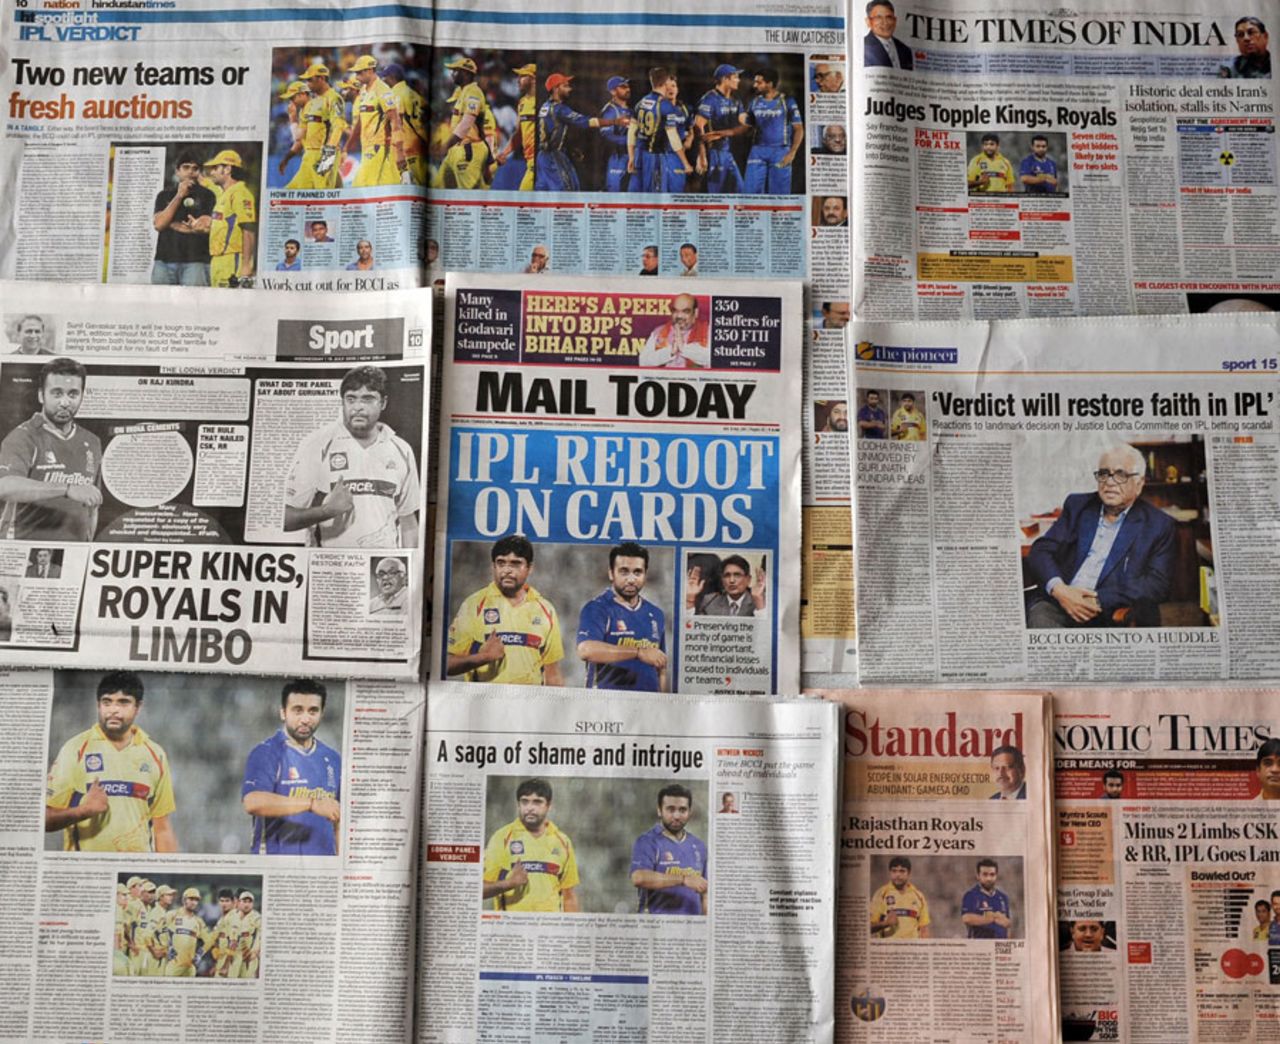 Newspaper coverage of the suspension of Chennai Super Kings and Rajasthan Royals, New Delhi, July 15, 2015